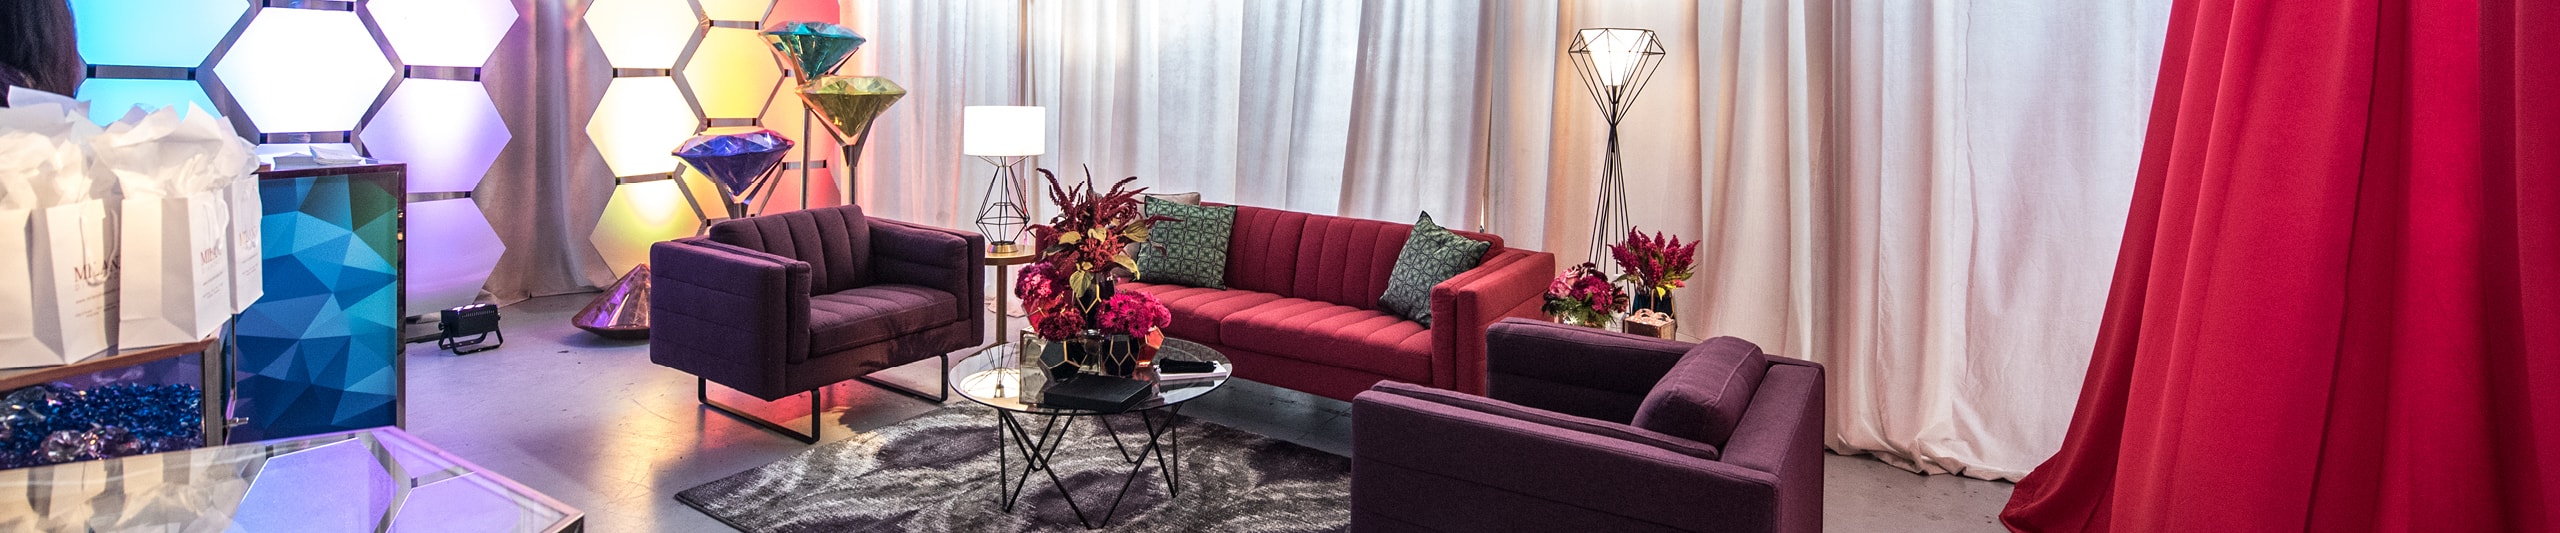 red and purple lounge furniture